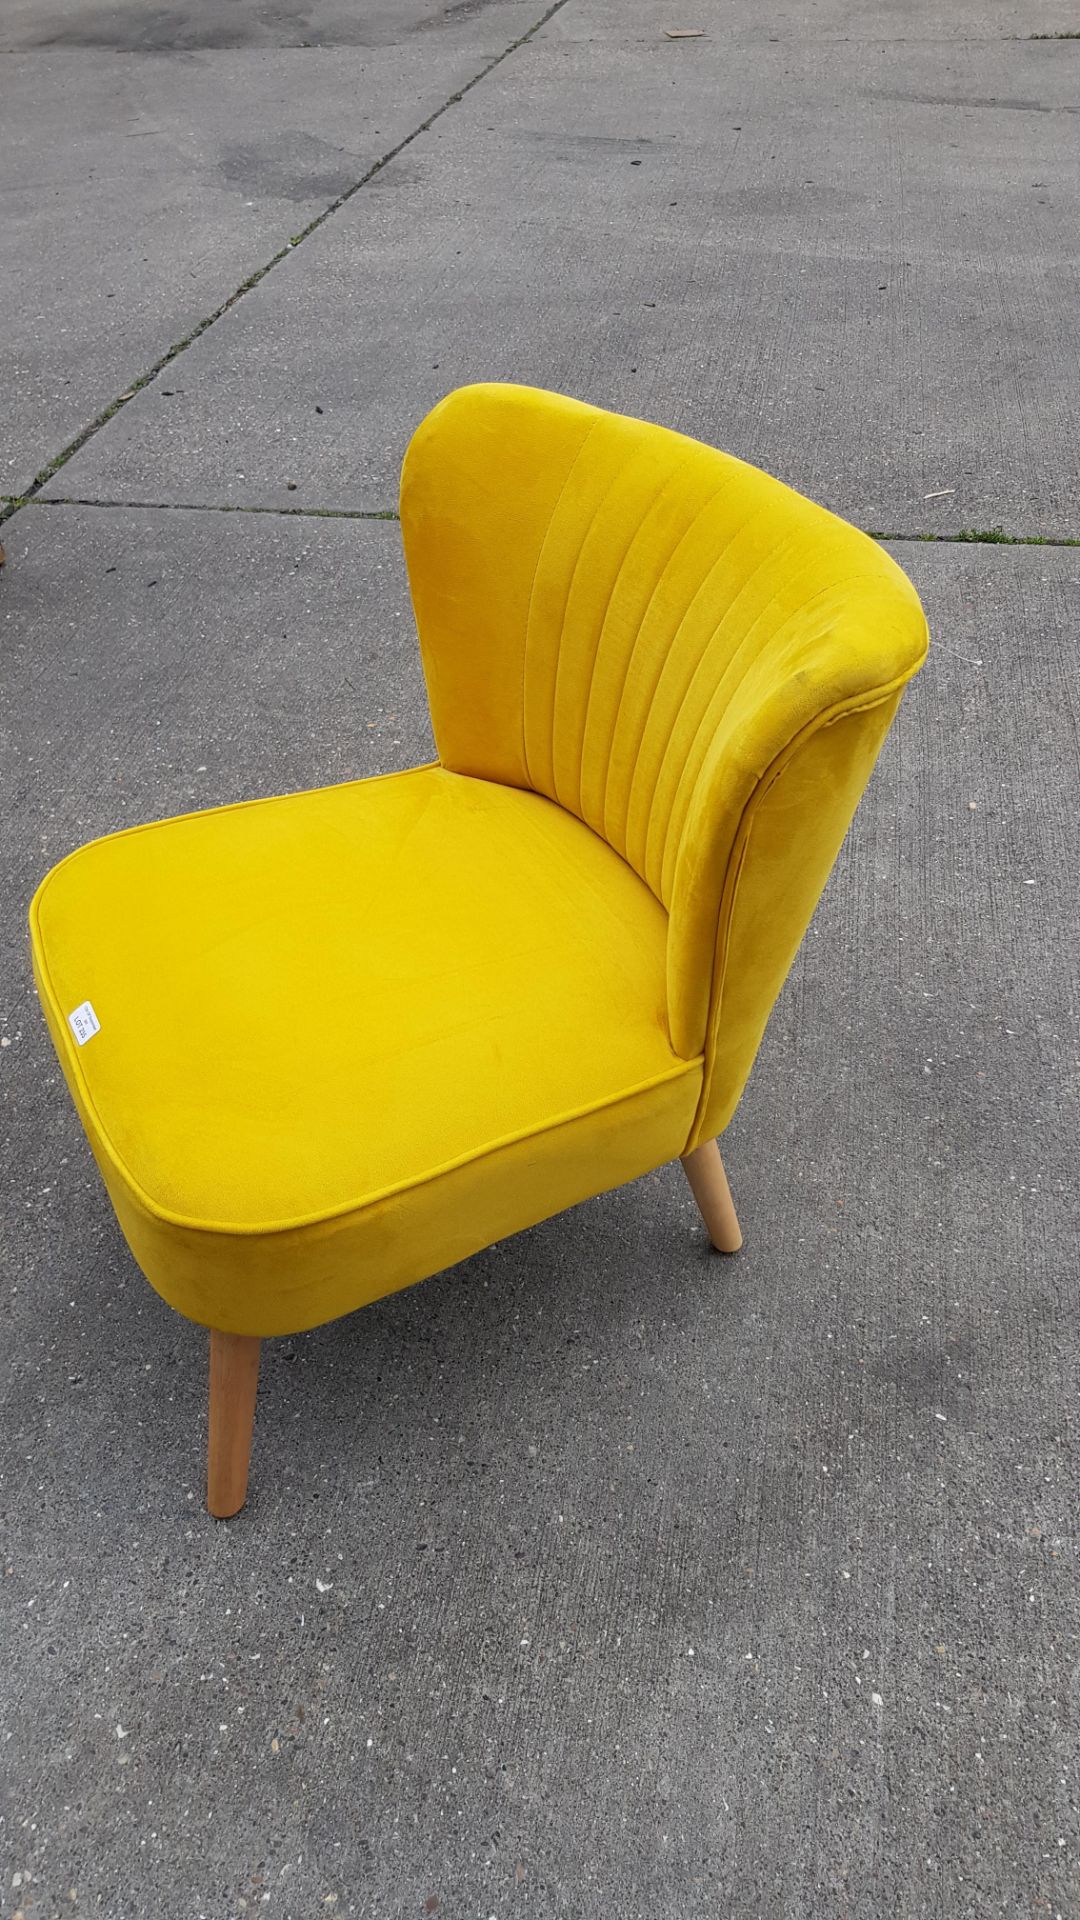 (R3M) 1x Occasional Chair Ochre. £79.00. Velvet Fabric Cover With Rubberwood Legs. (H72x W60x D70cm - Image 6 of 8